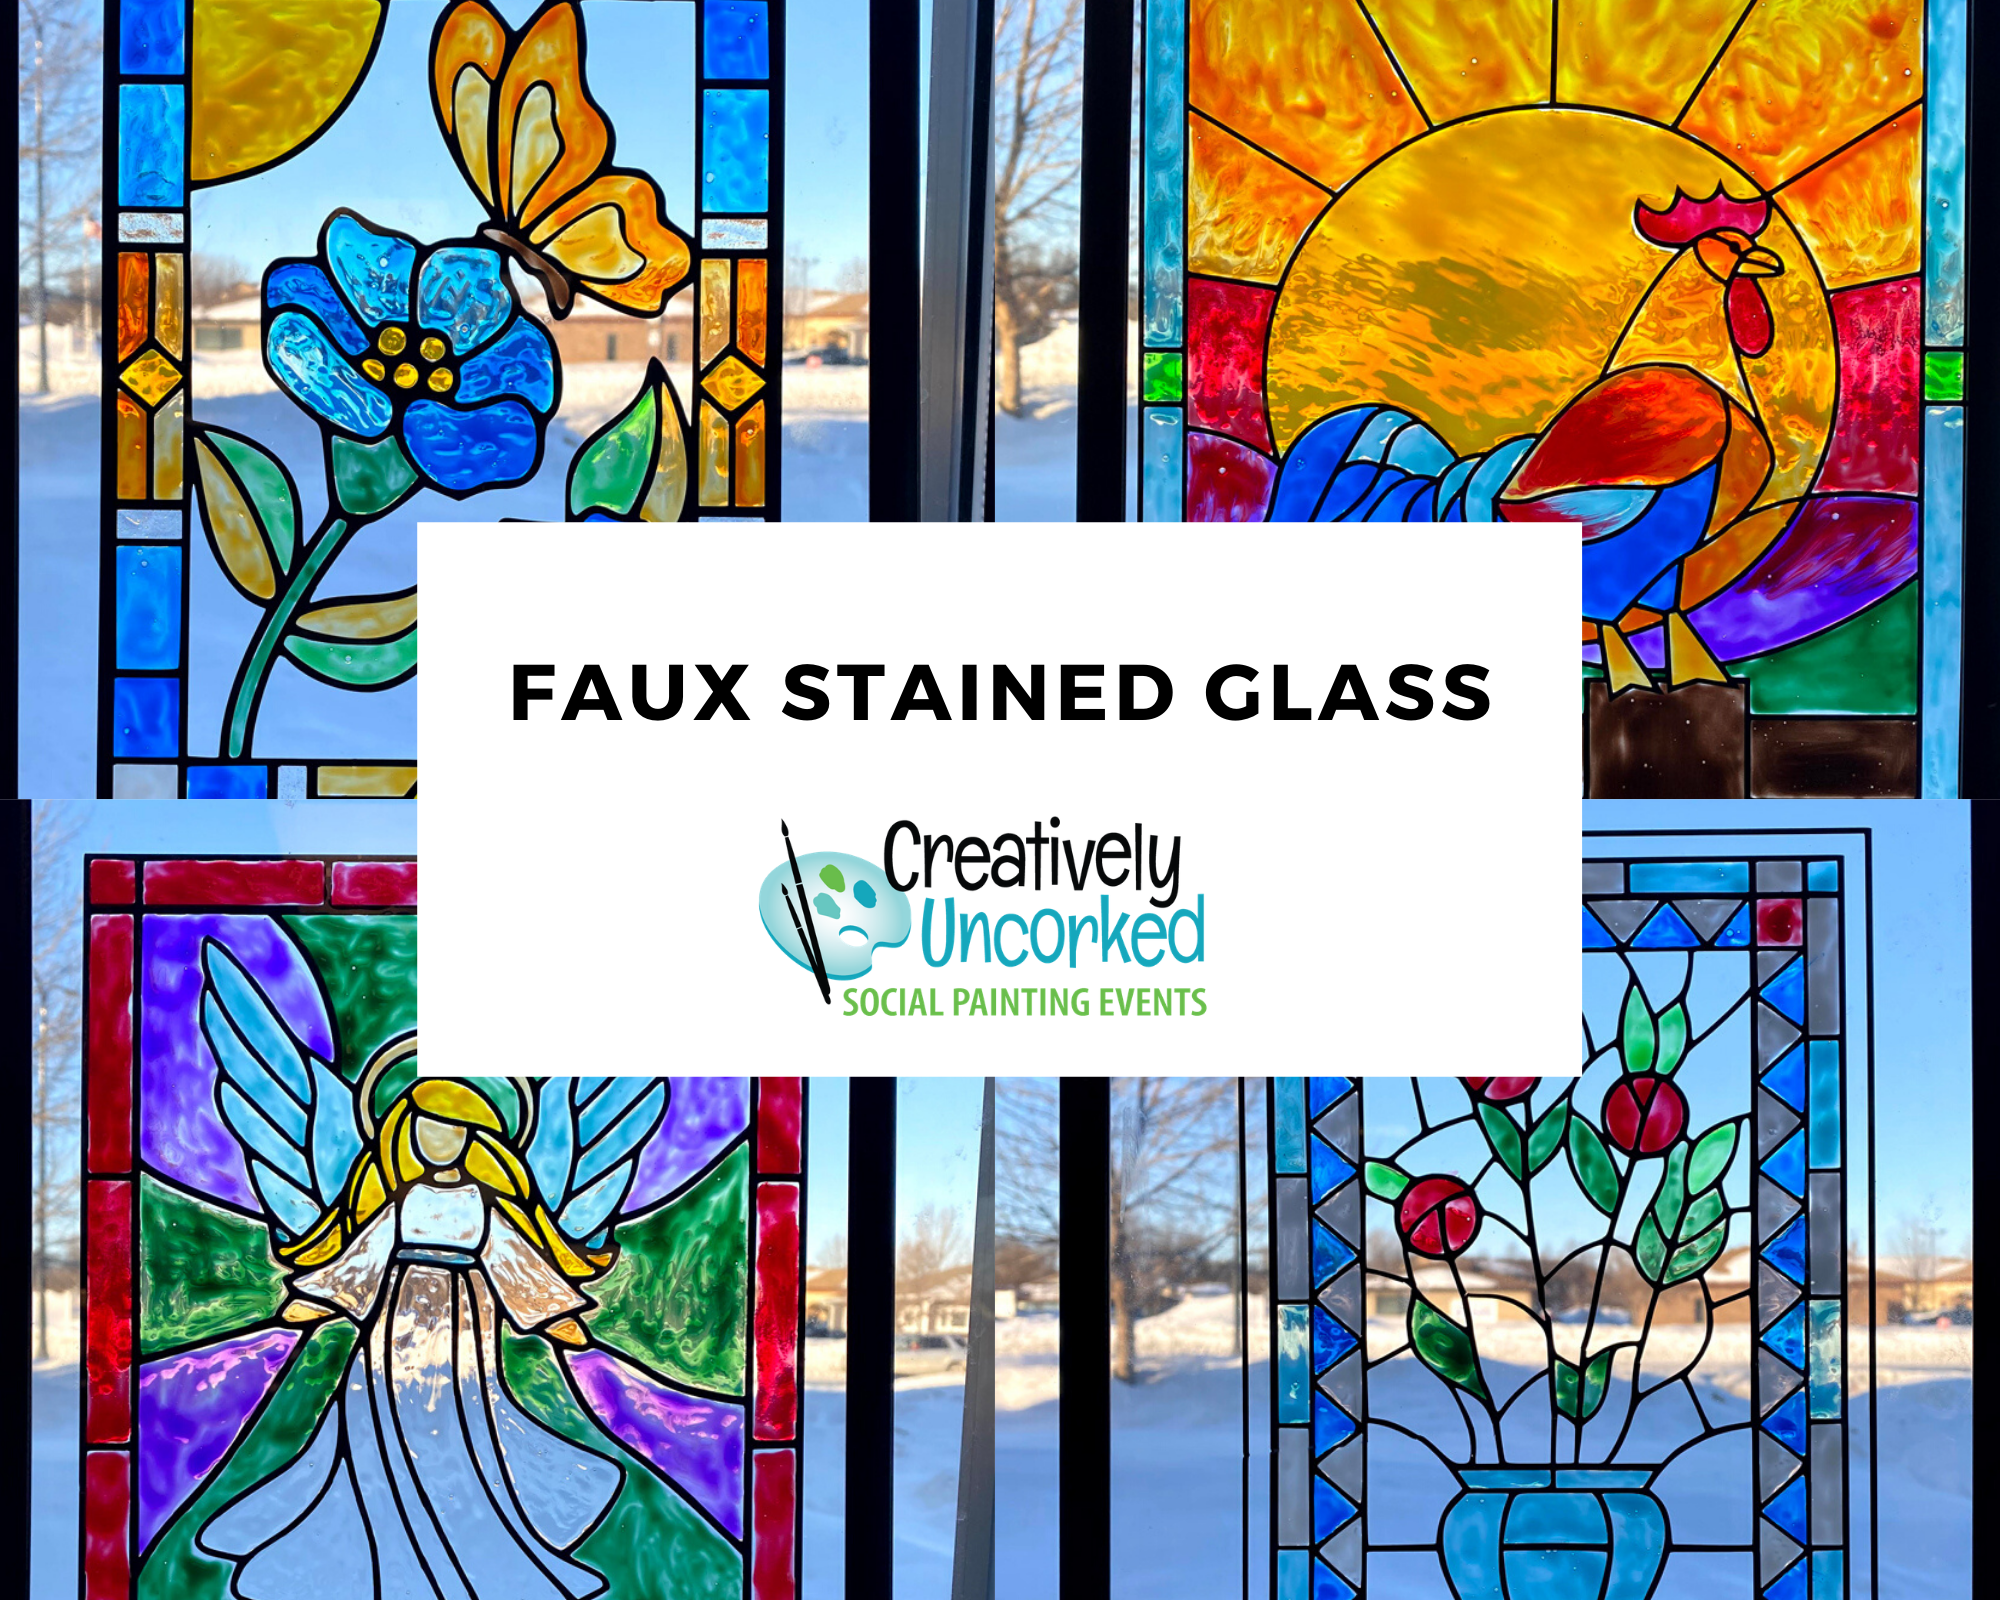 Stained Glass Kits